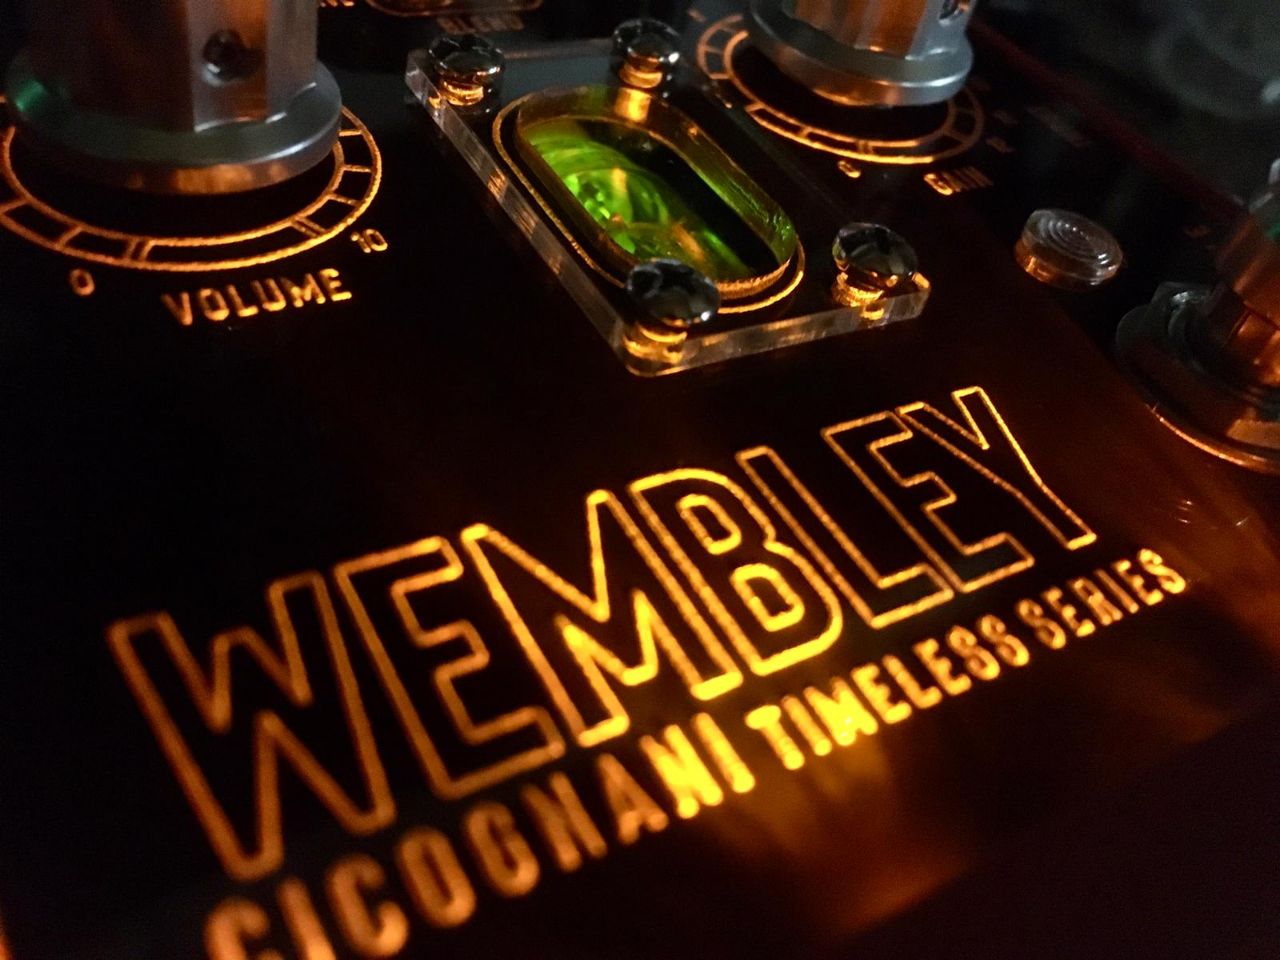 WEMBLEY tube booster/overdrive)